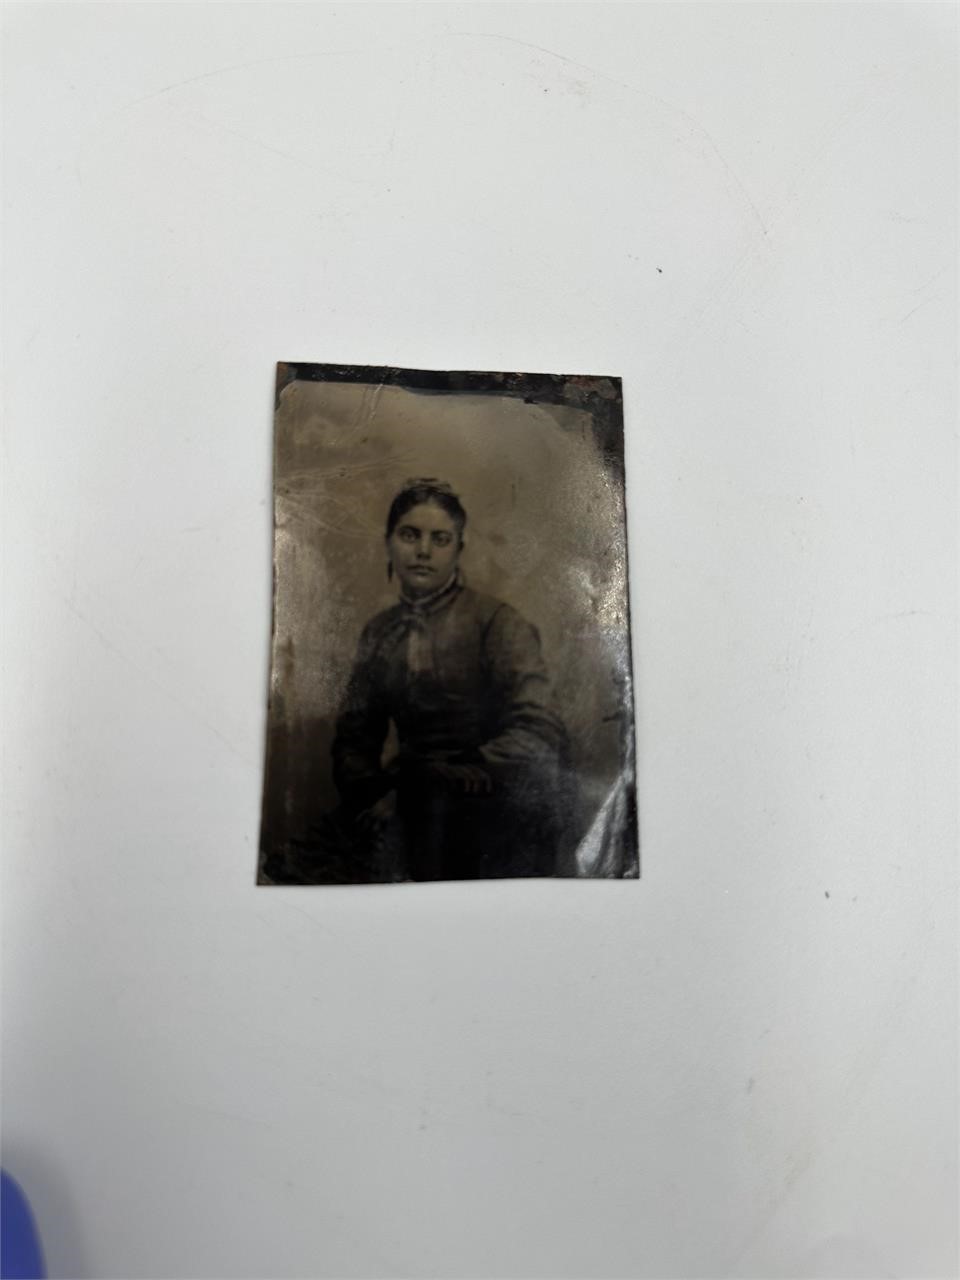  Ambrotype, Antiques, collectibles, glassware, vintage photo